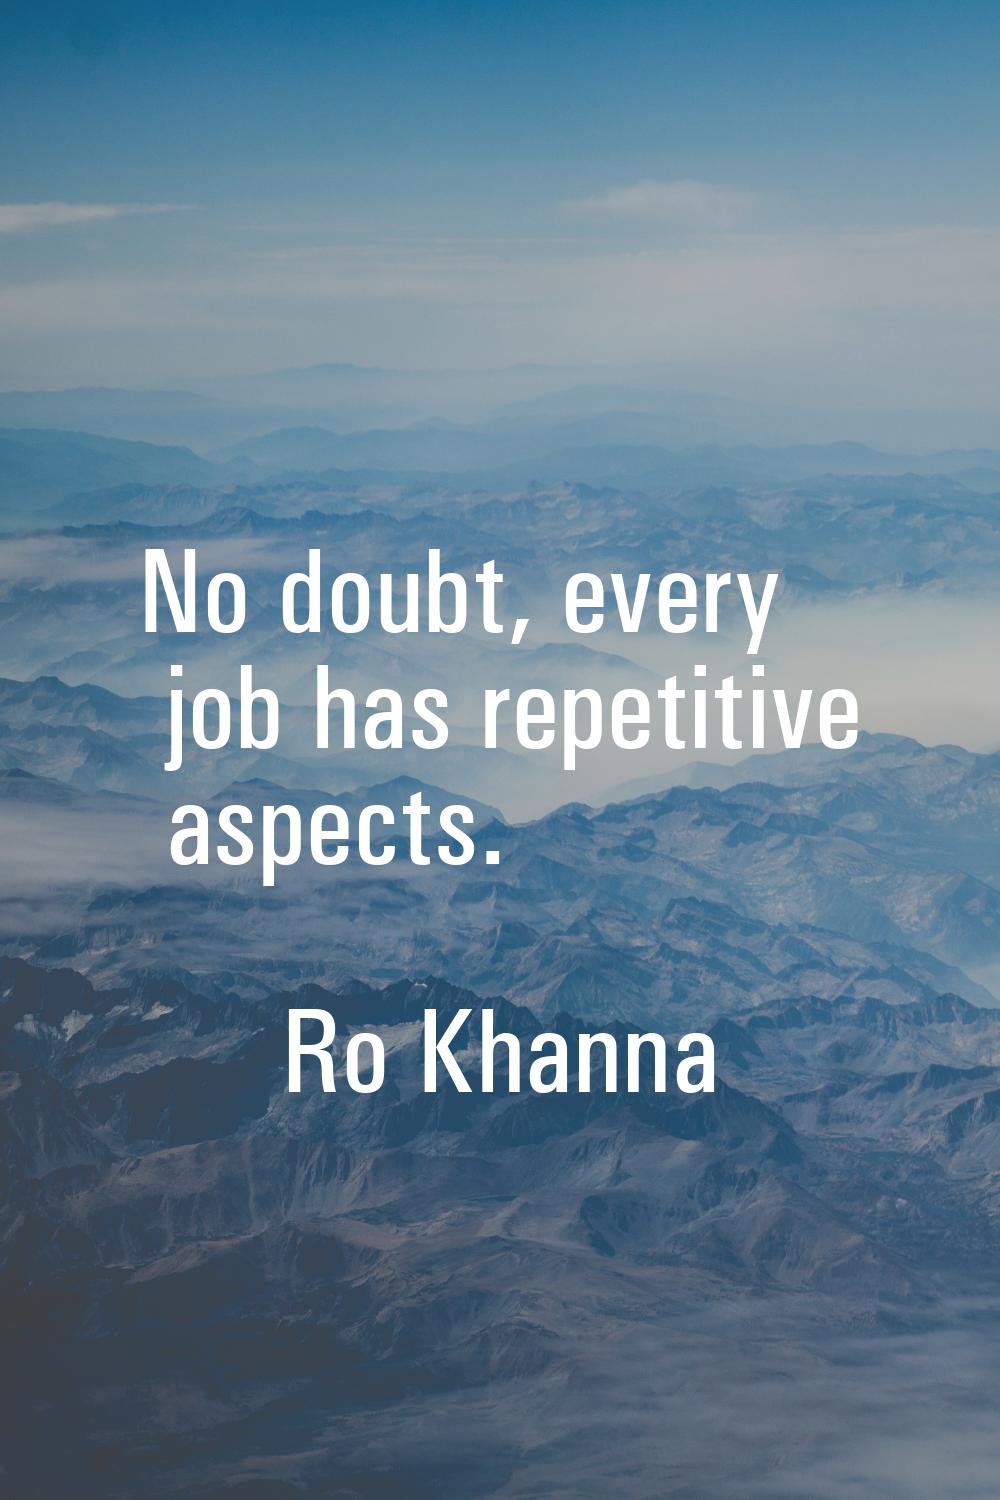 No doubt, every job has repetitive aspects.